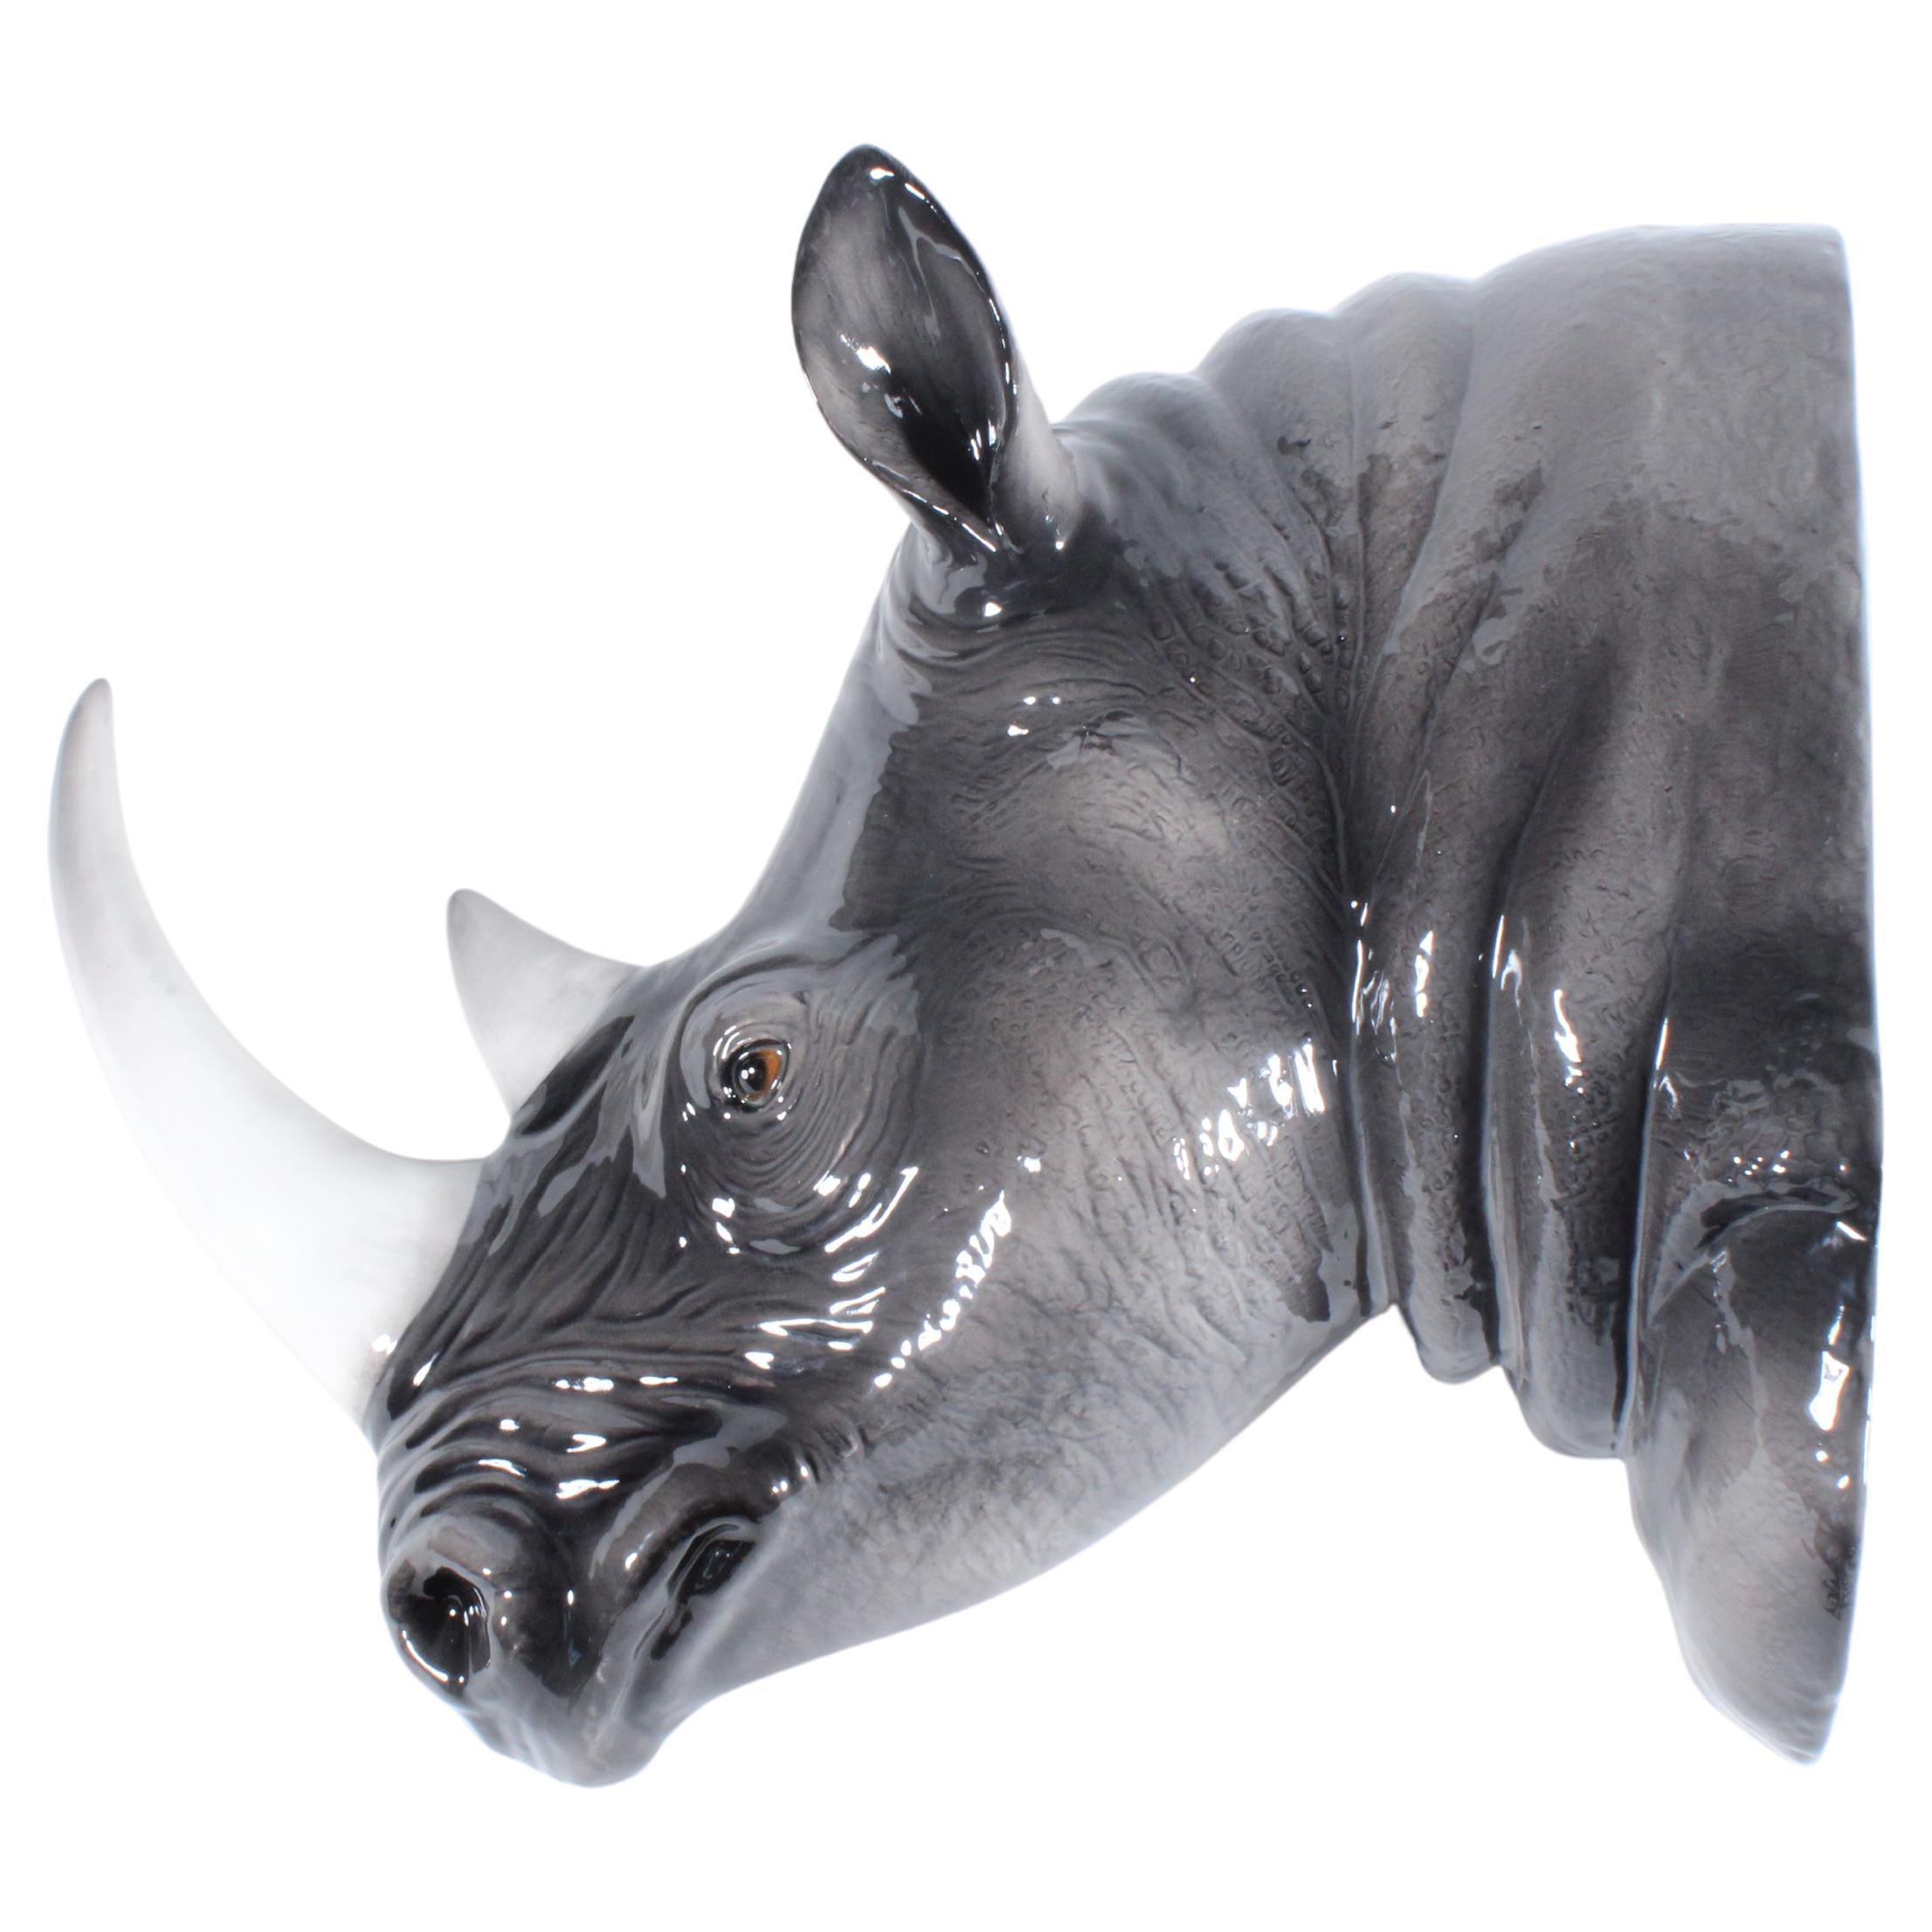 Stunning Vintage Bassano Ceramic Bust  Of A Rhinoceros * Free Delivery